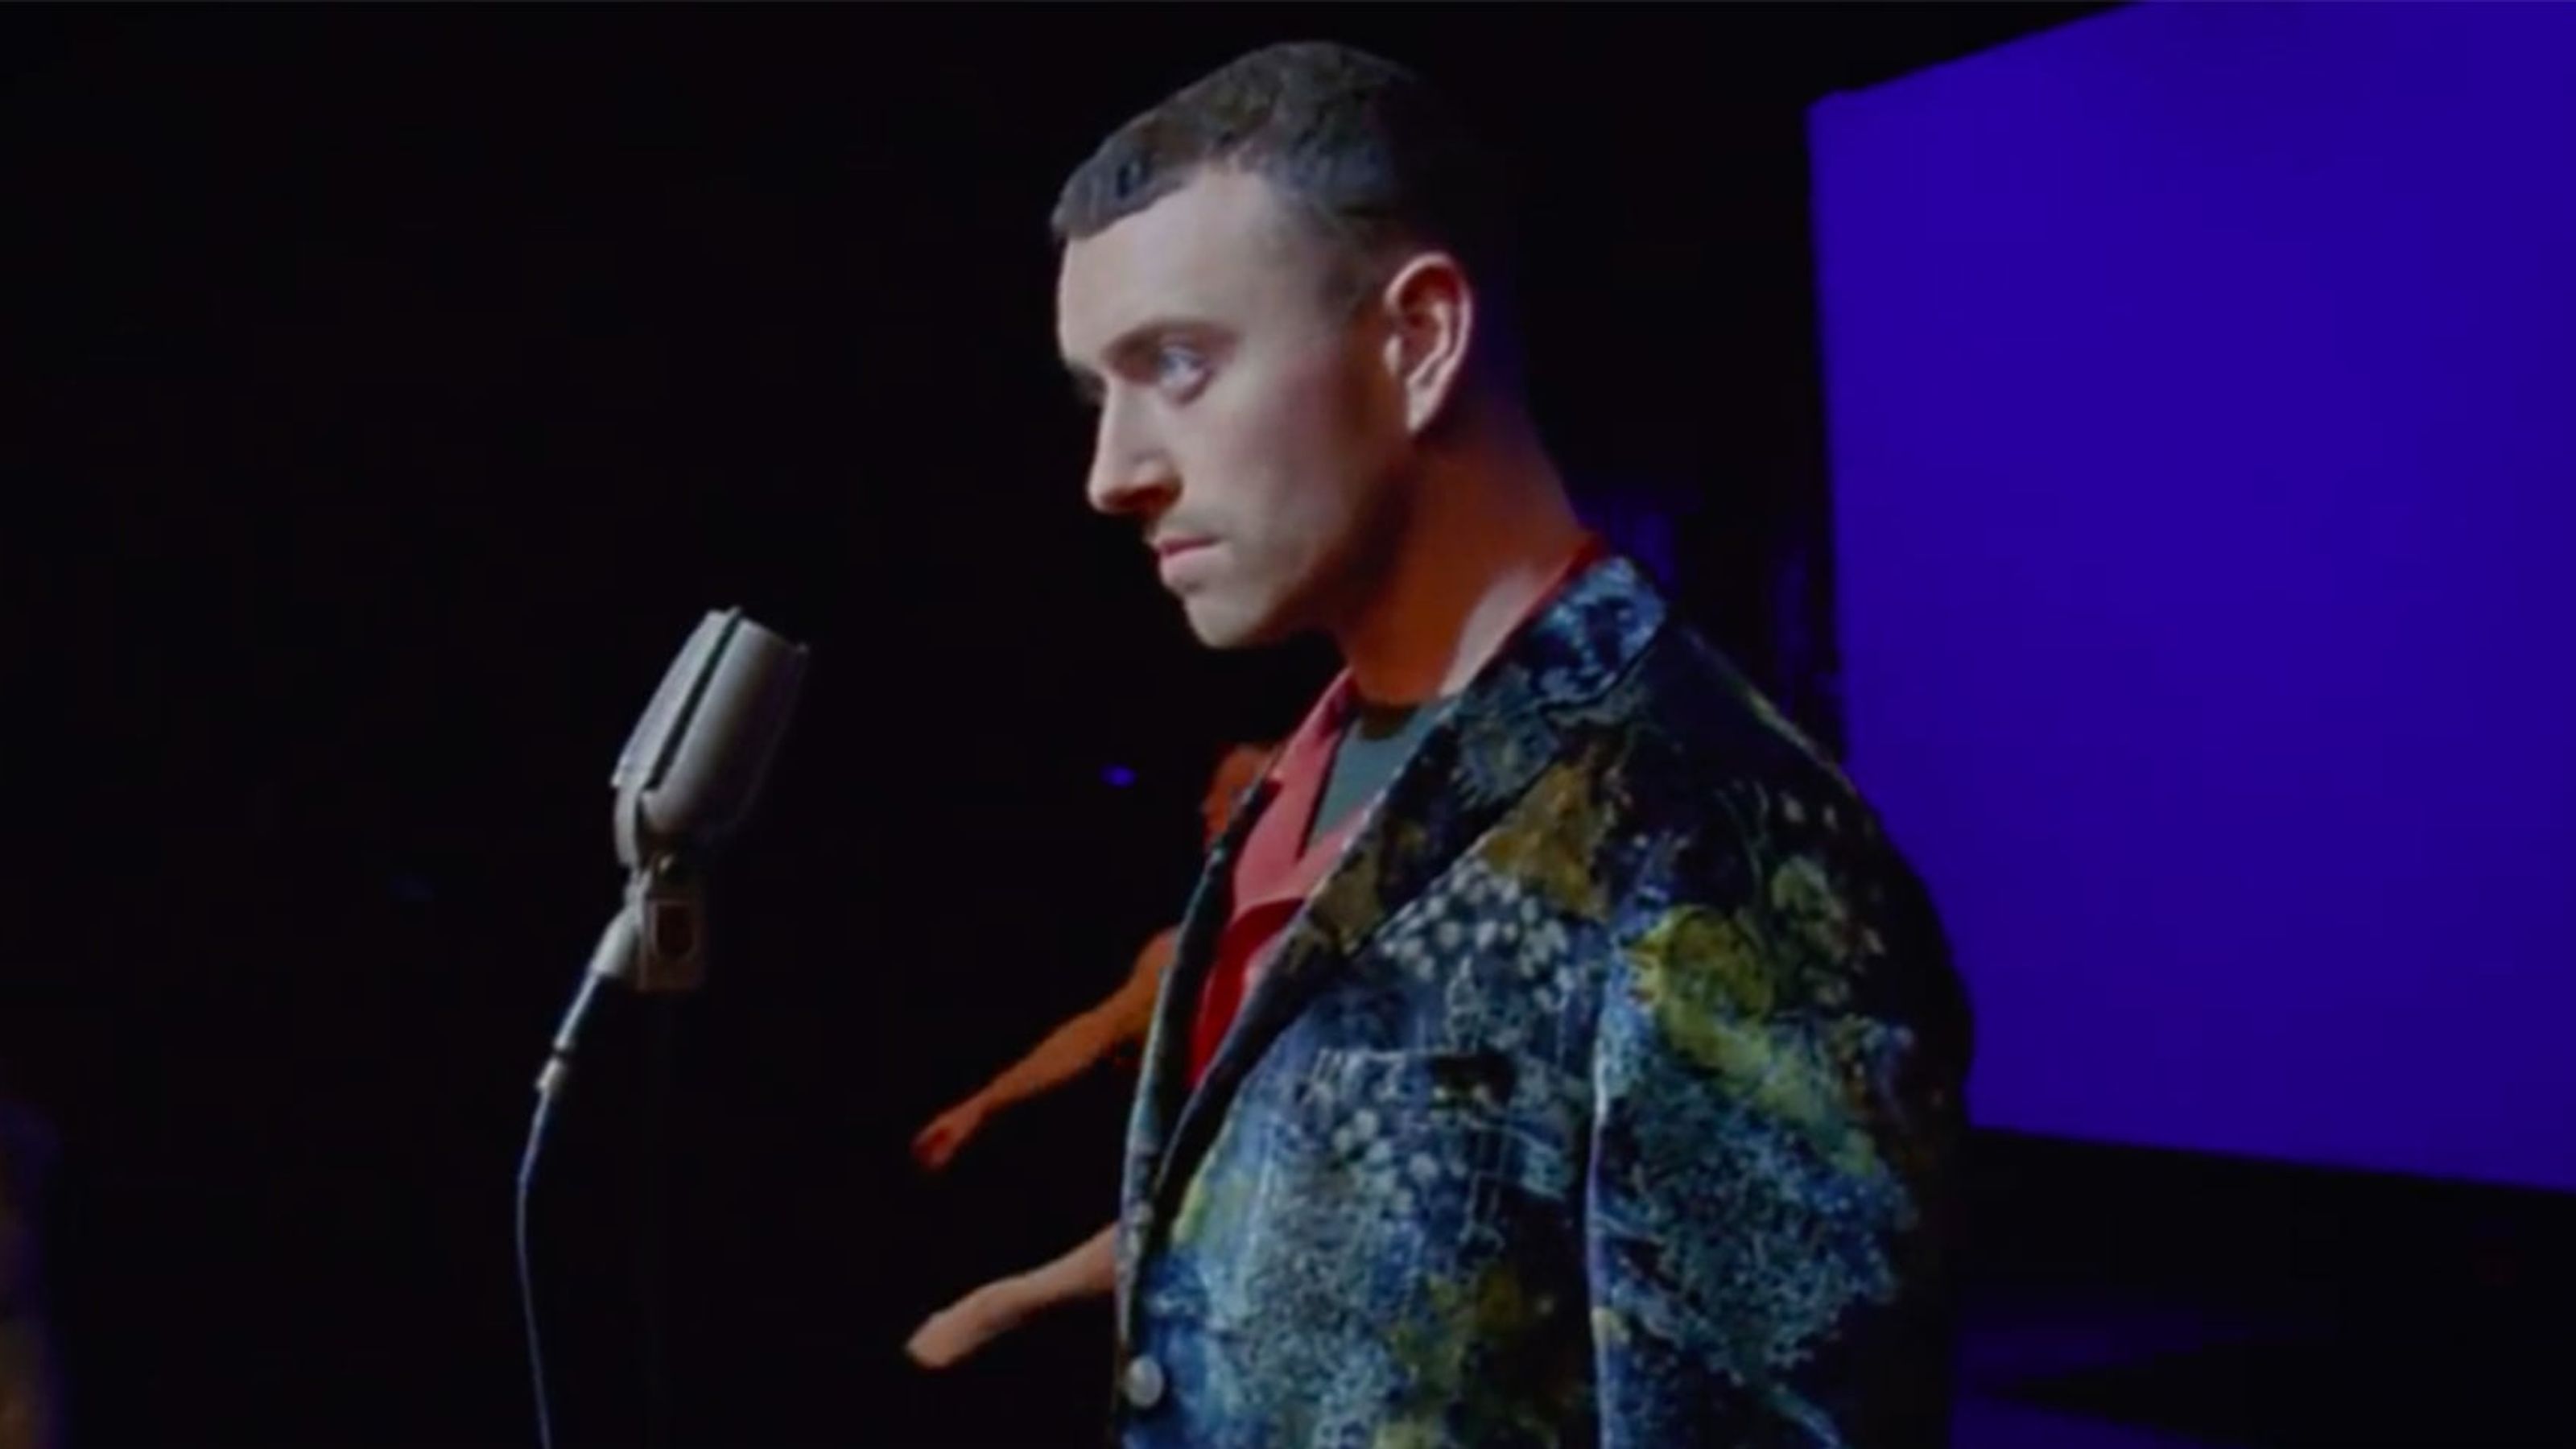 Sam Smith “One Last Song”